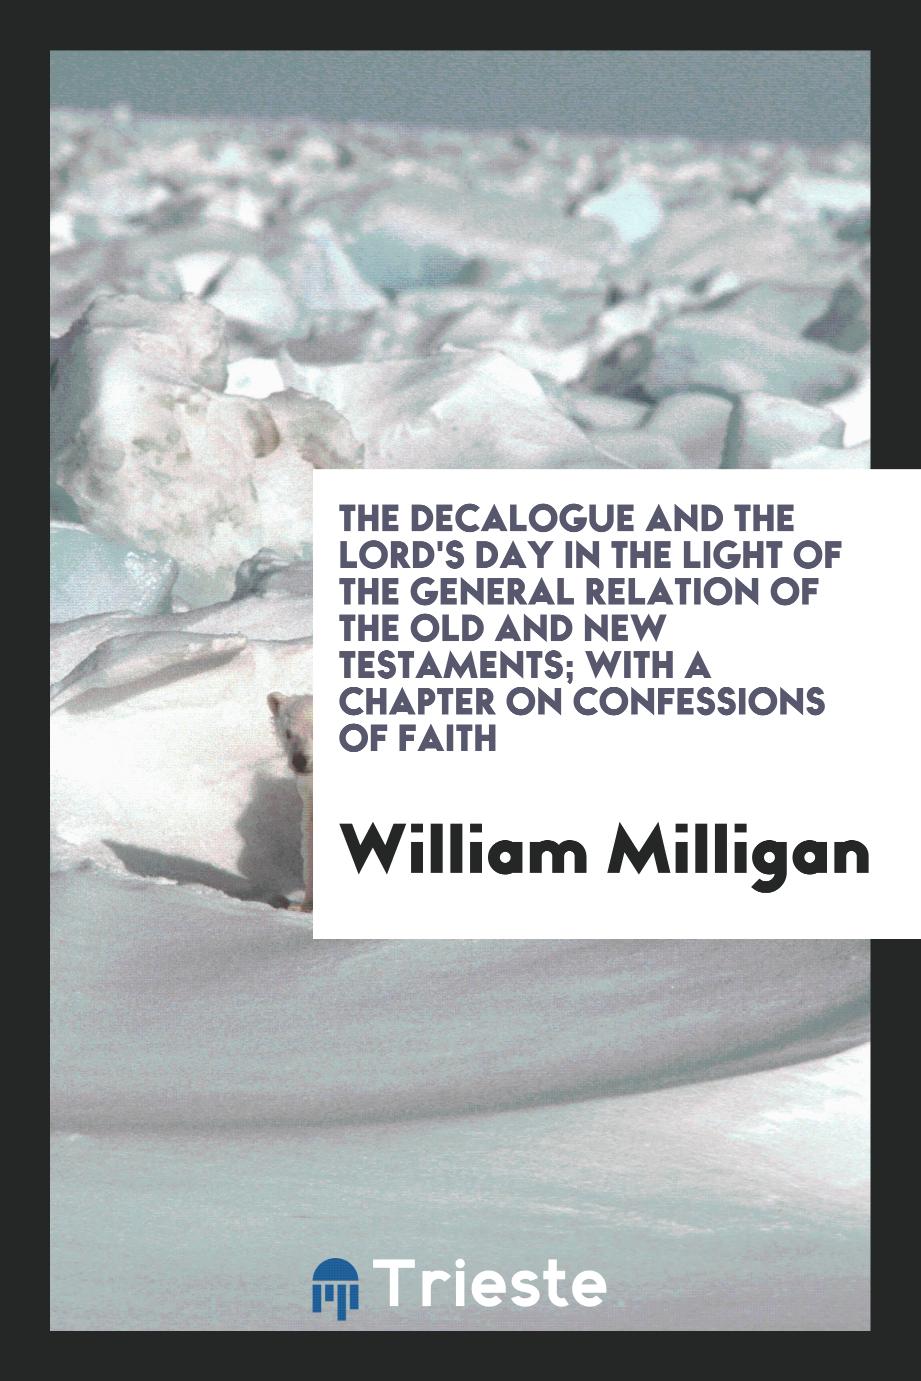 The decalogue and the Lord's Day in the light of the general relation of the Old and New Testaments; with a chapter on confessions of faith